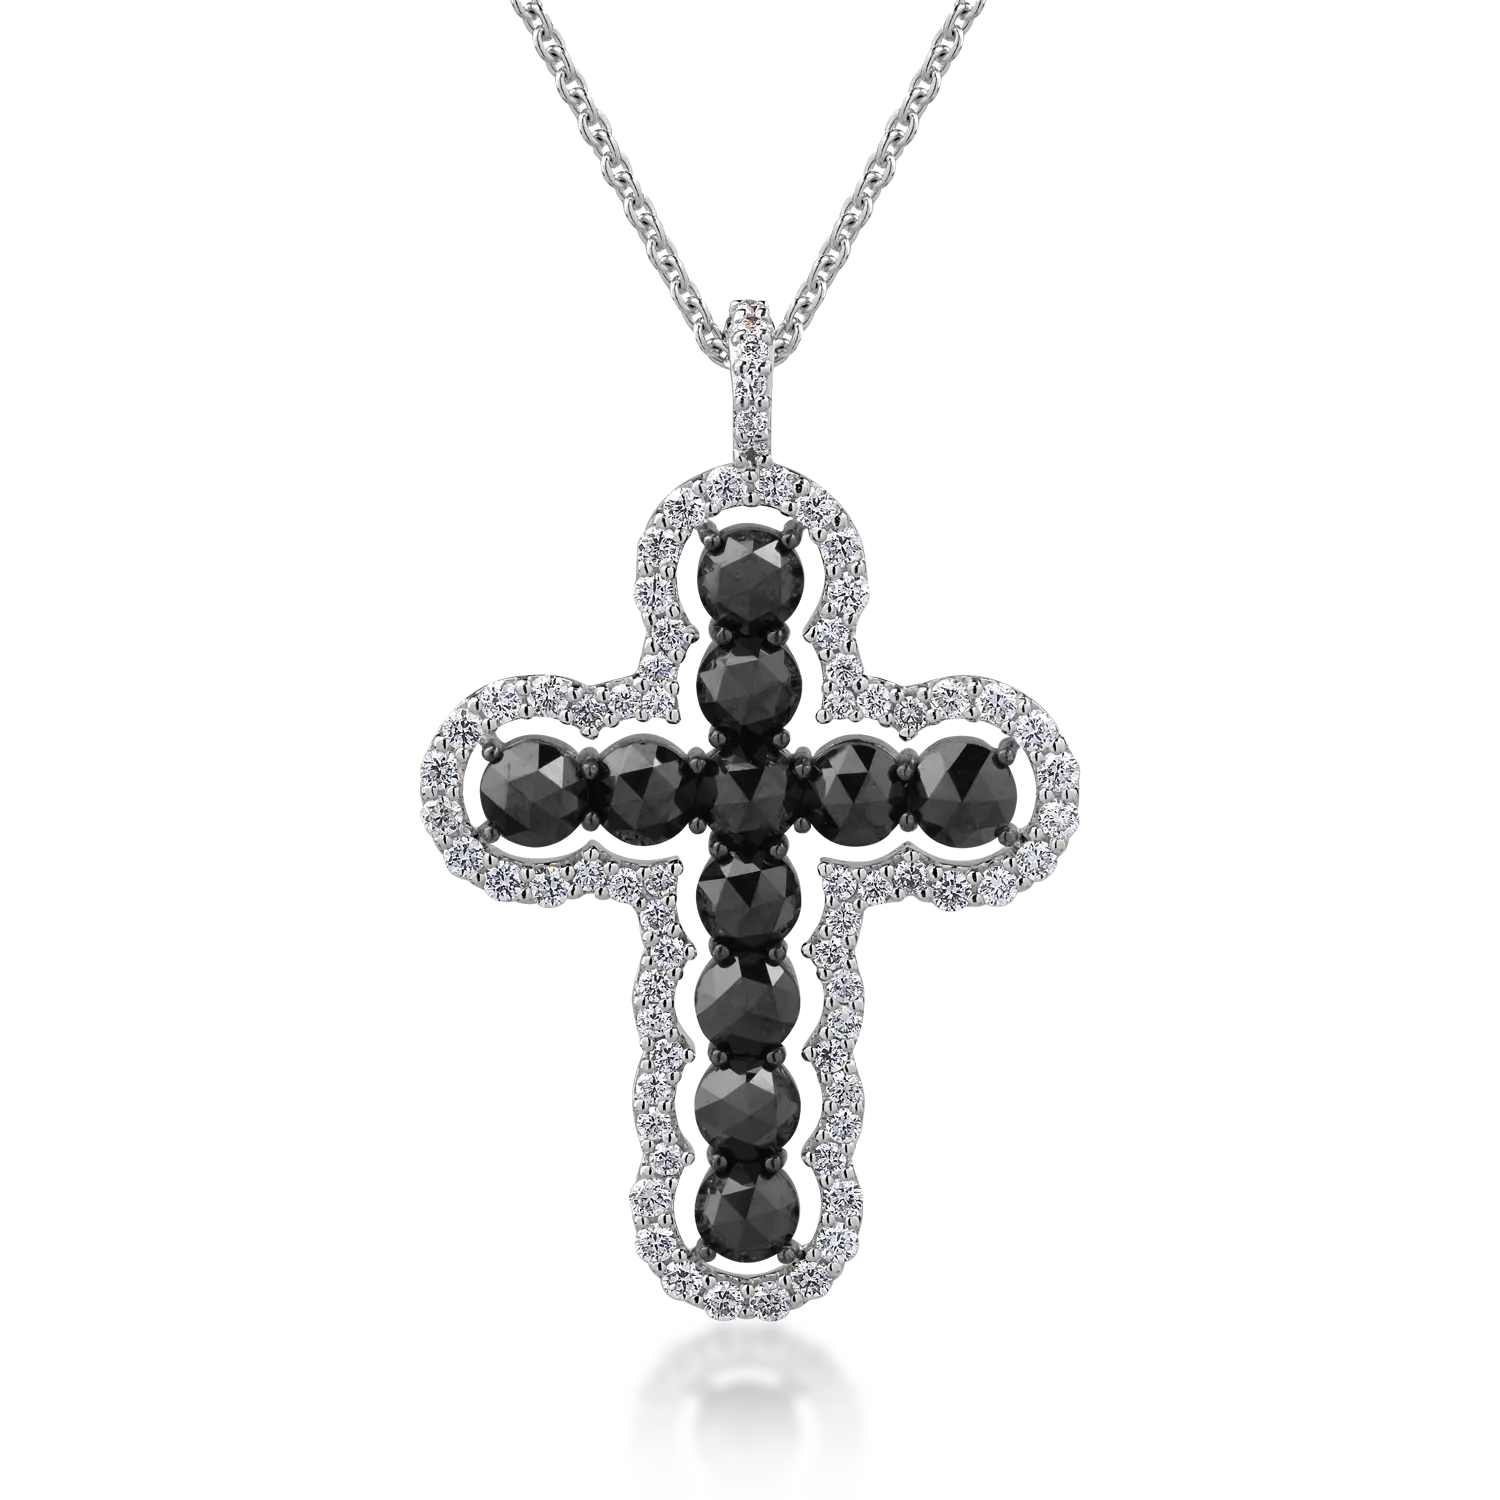 18K white gold cross pendant necklace with 1.9ct black diamonds and 0.5ct clear diamonds